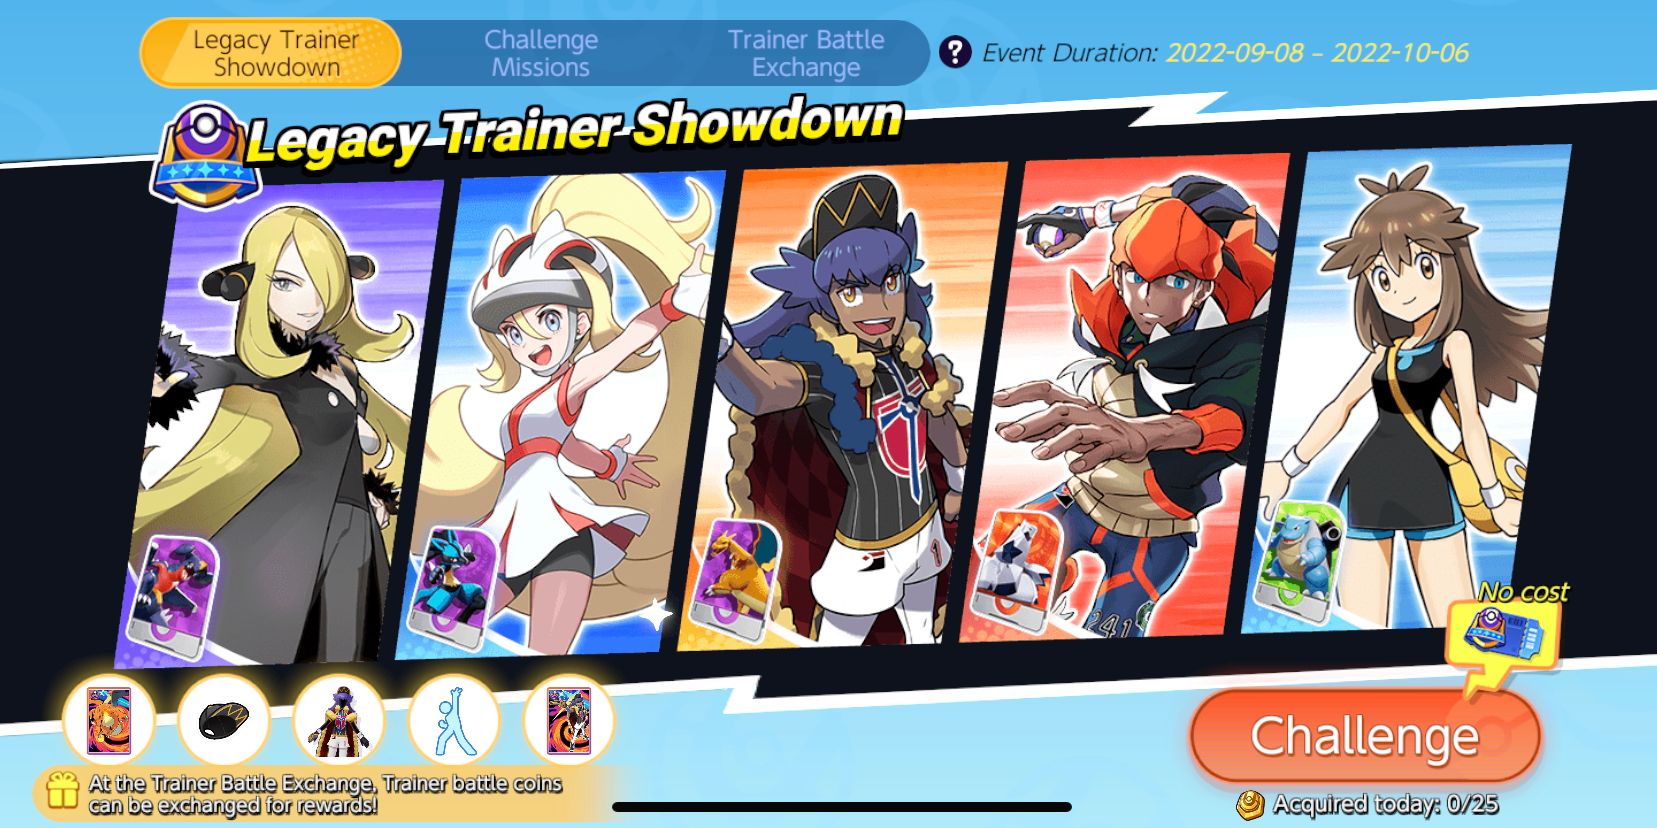 Legacy Trainer Showdown main screen from Pokemon Unite showing all five Legacy Trainers